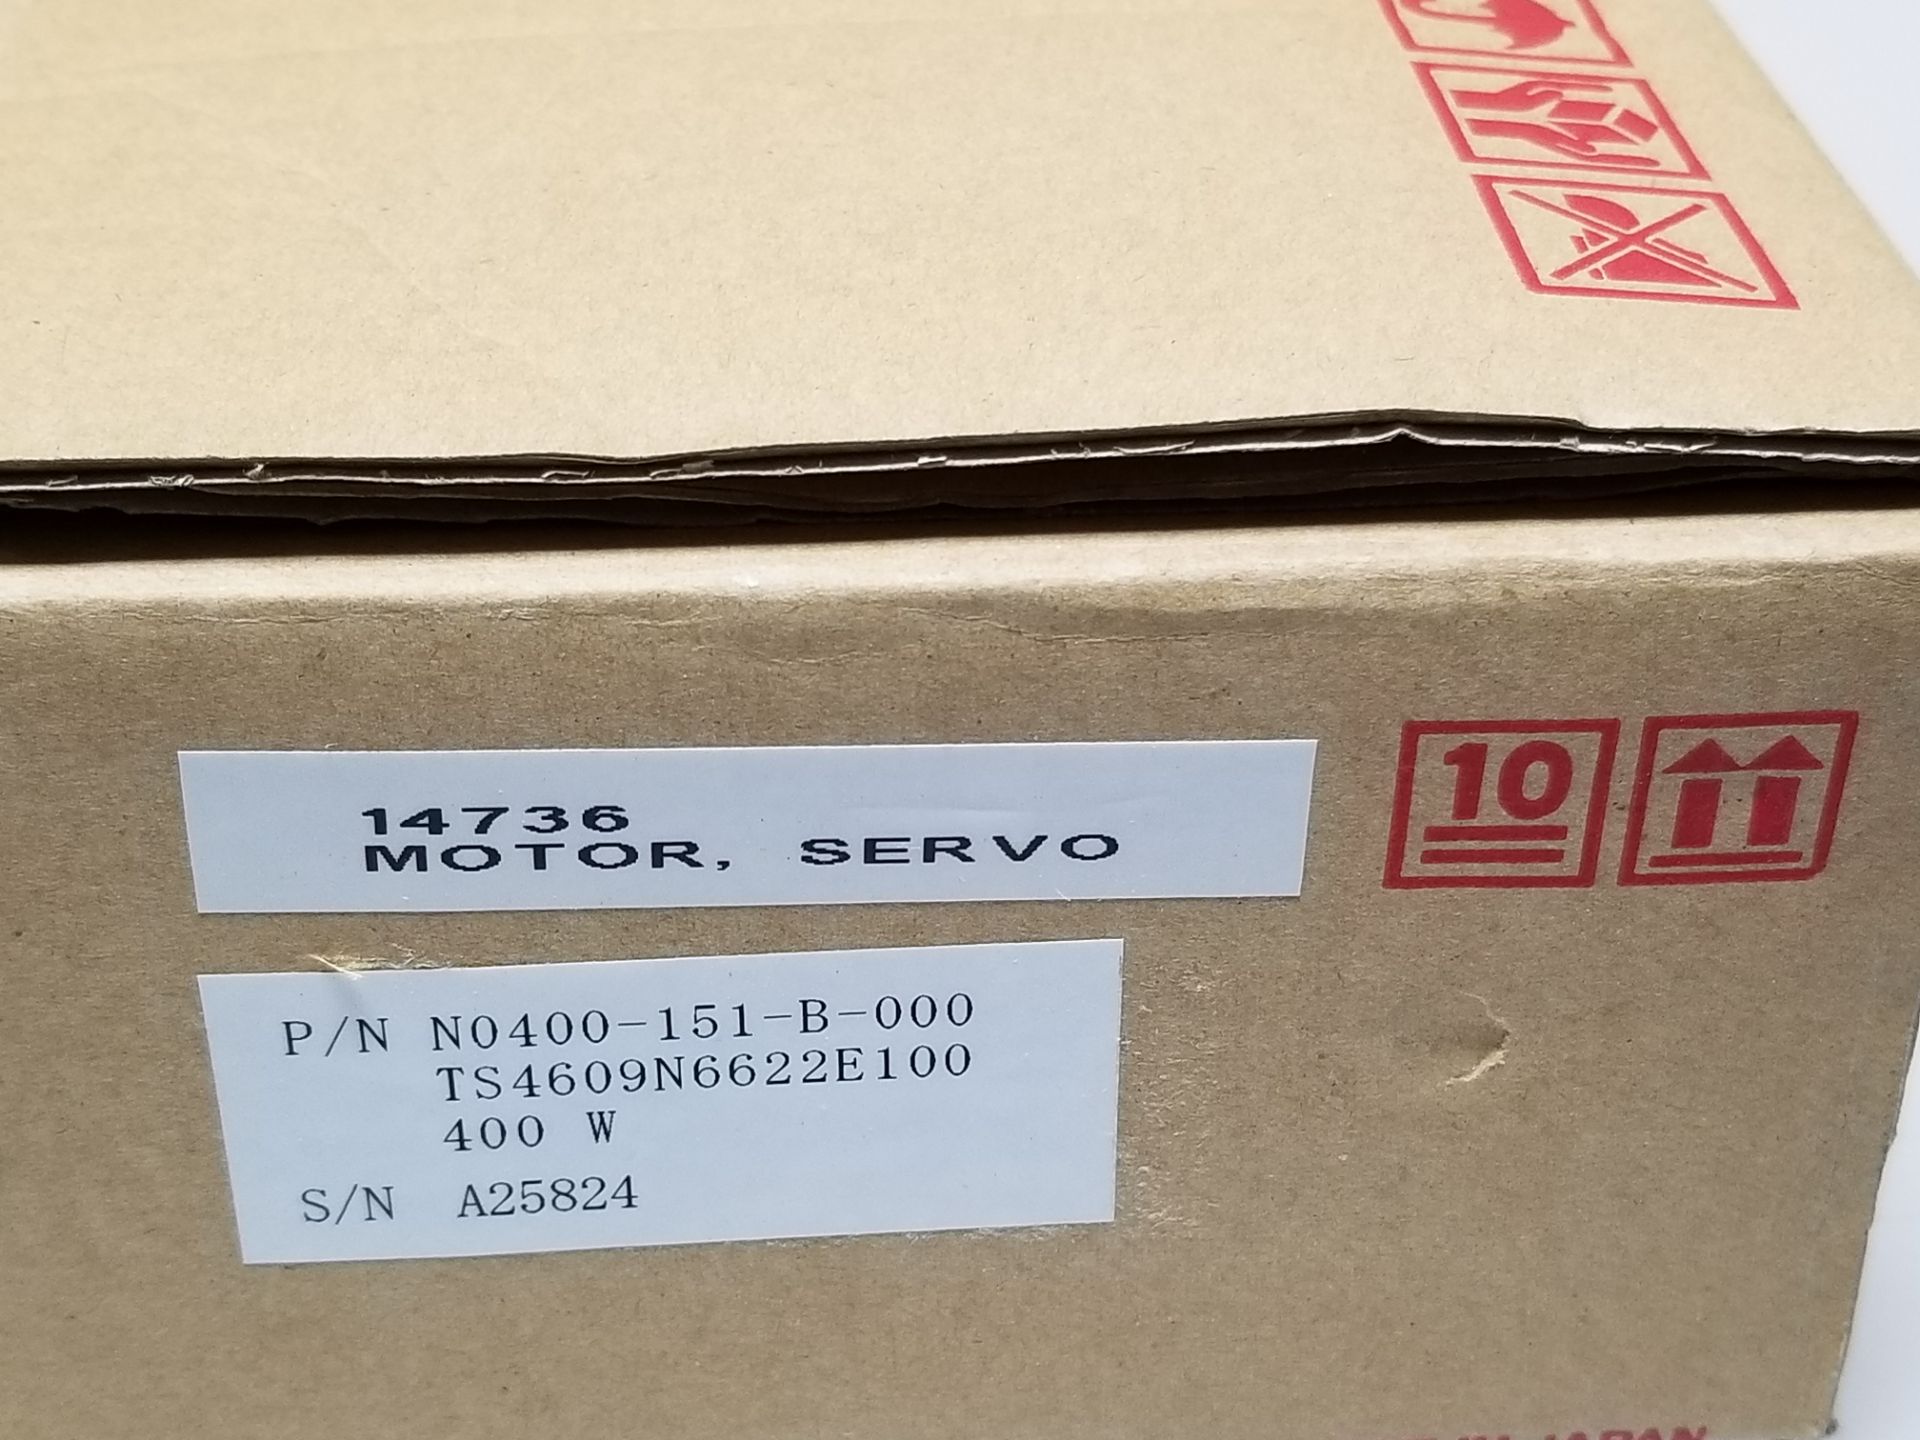 NEW APPLIED MOTION N0400-151-B-000 AC SERVO MOTOR WITH BRAKE - Image 2 of 7